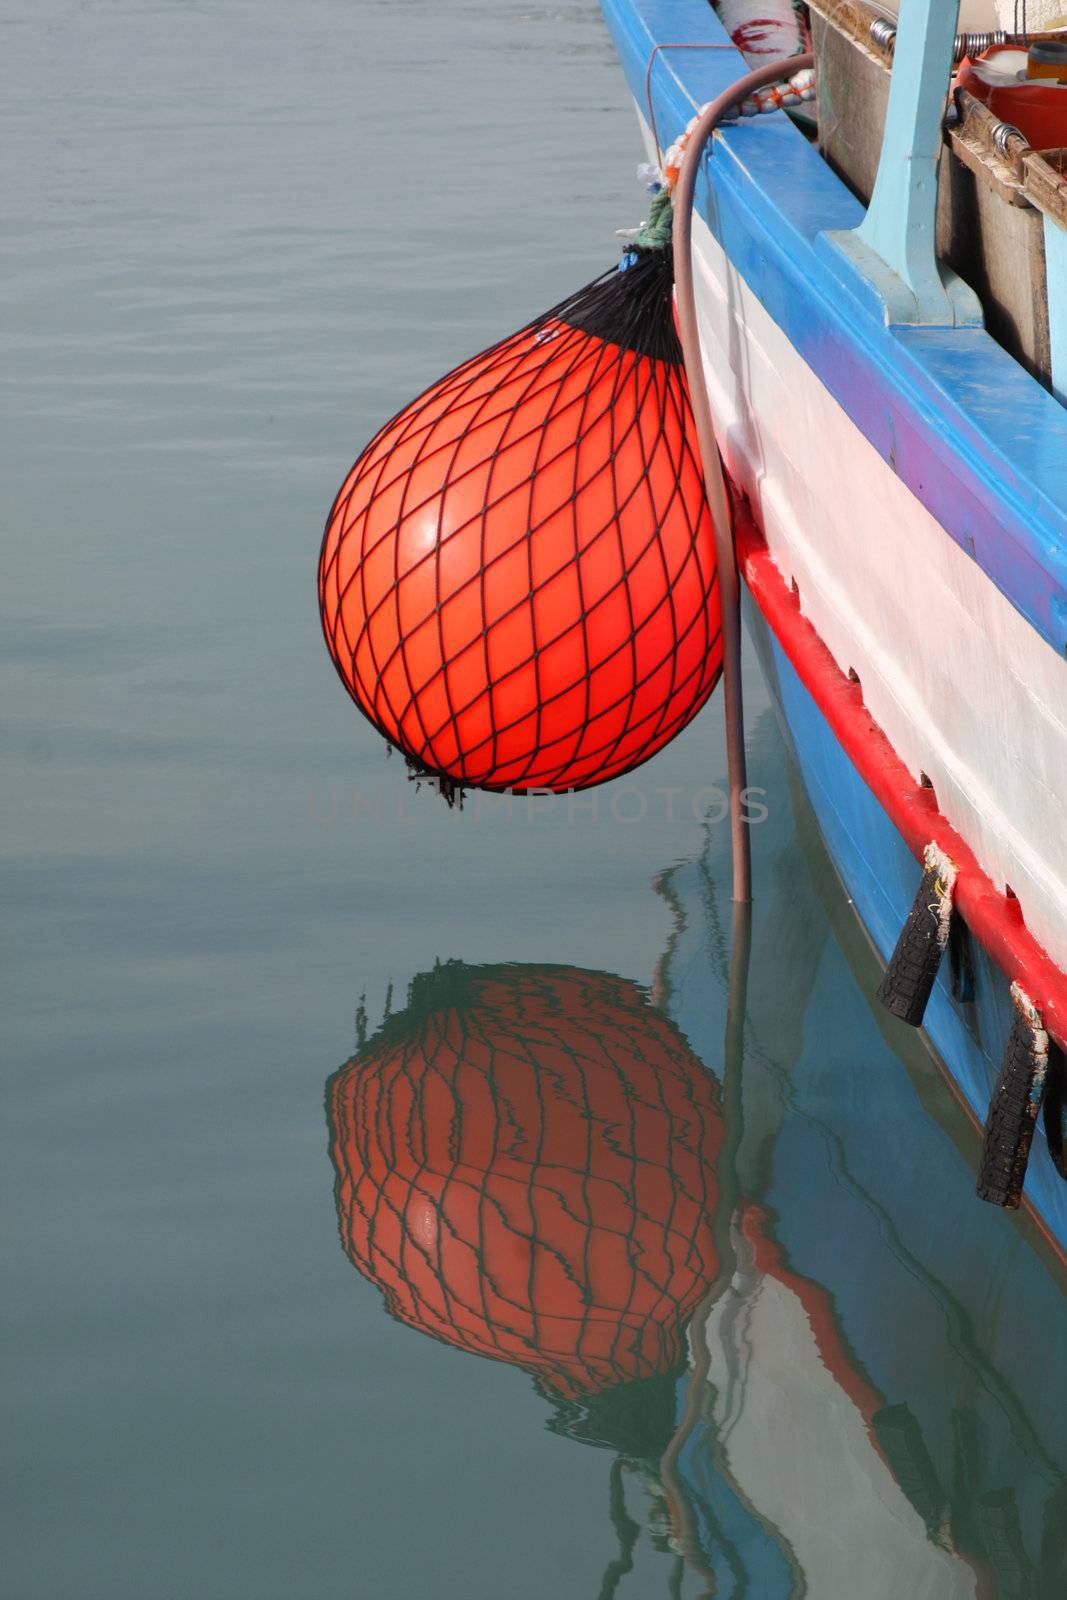 Bright red fender on side of a maltese fishing boat